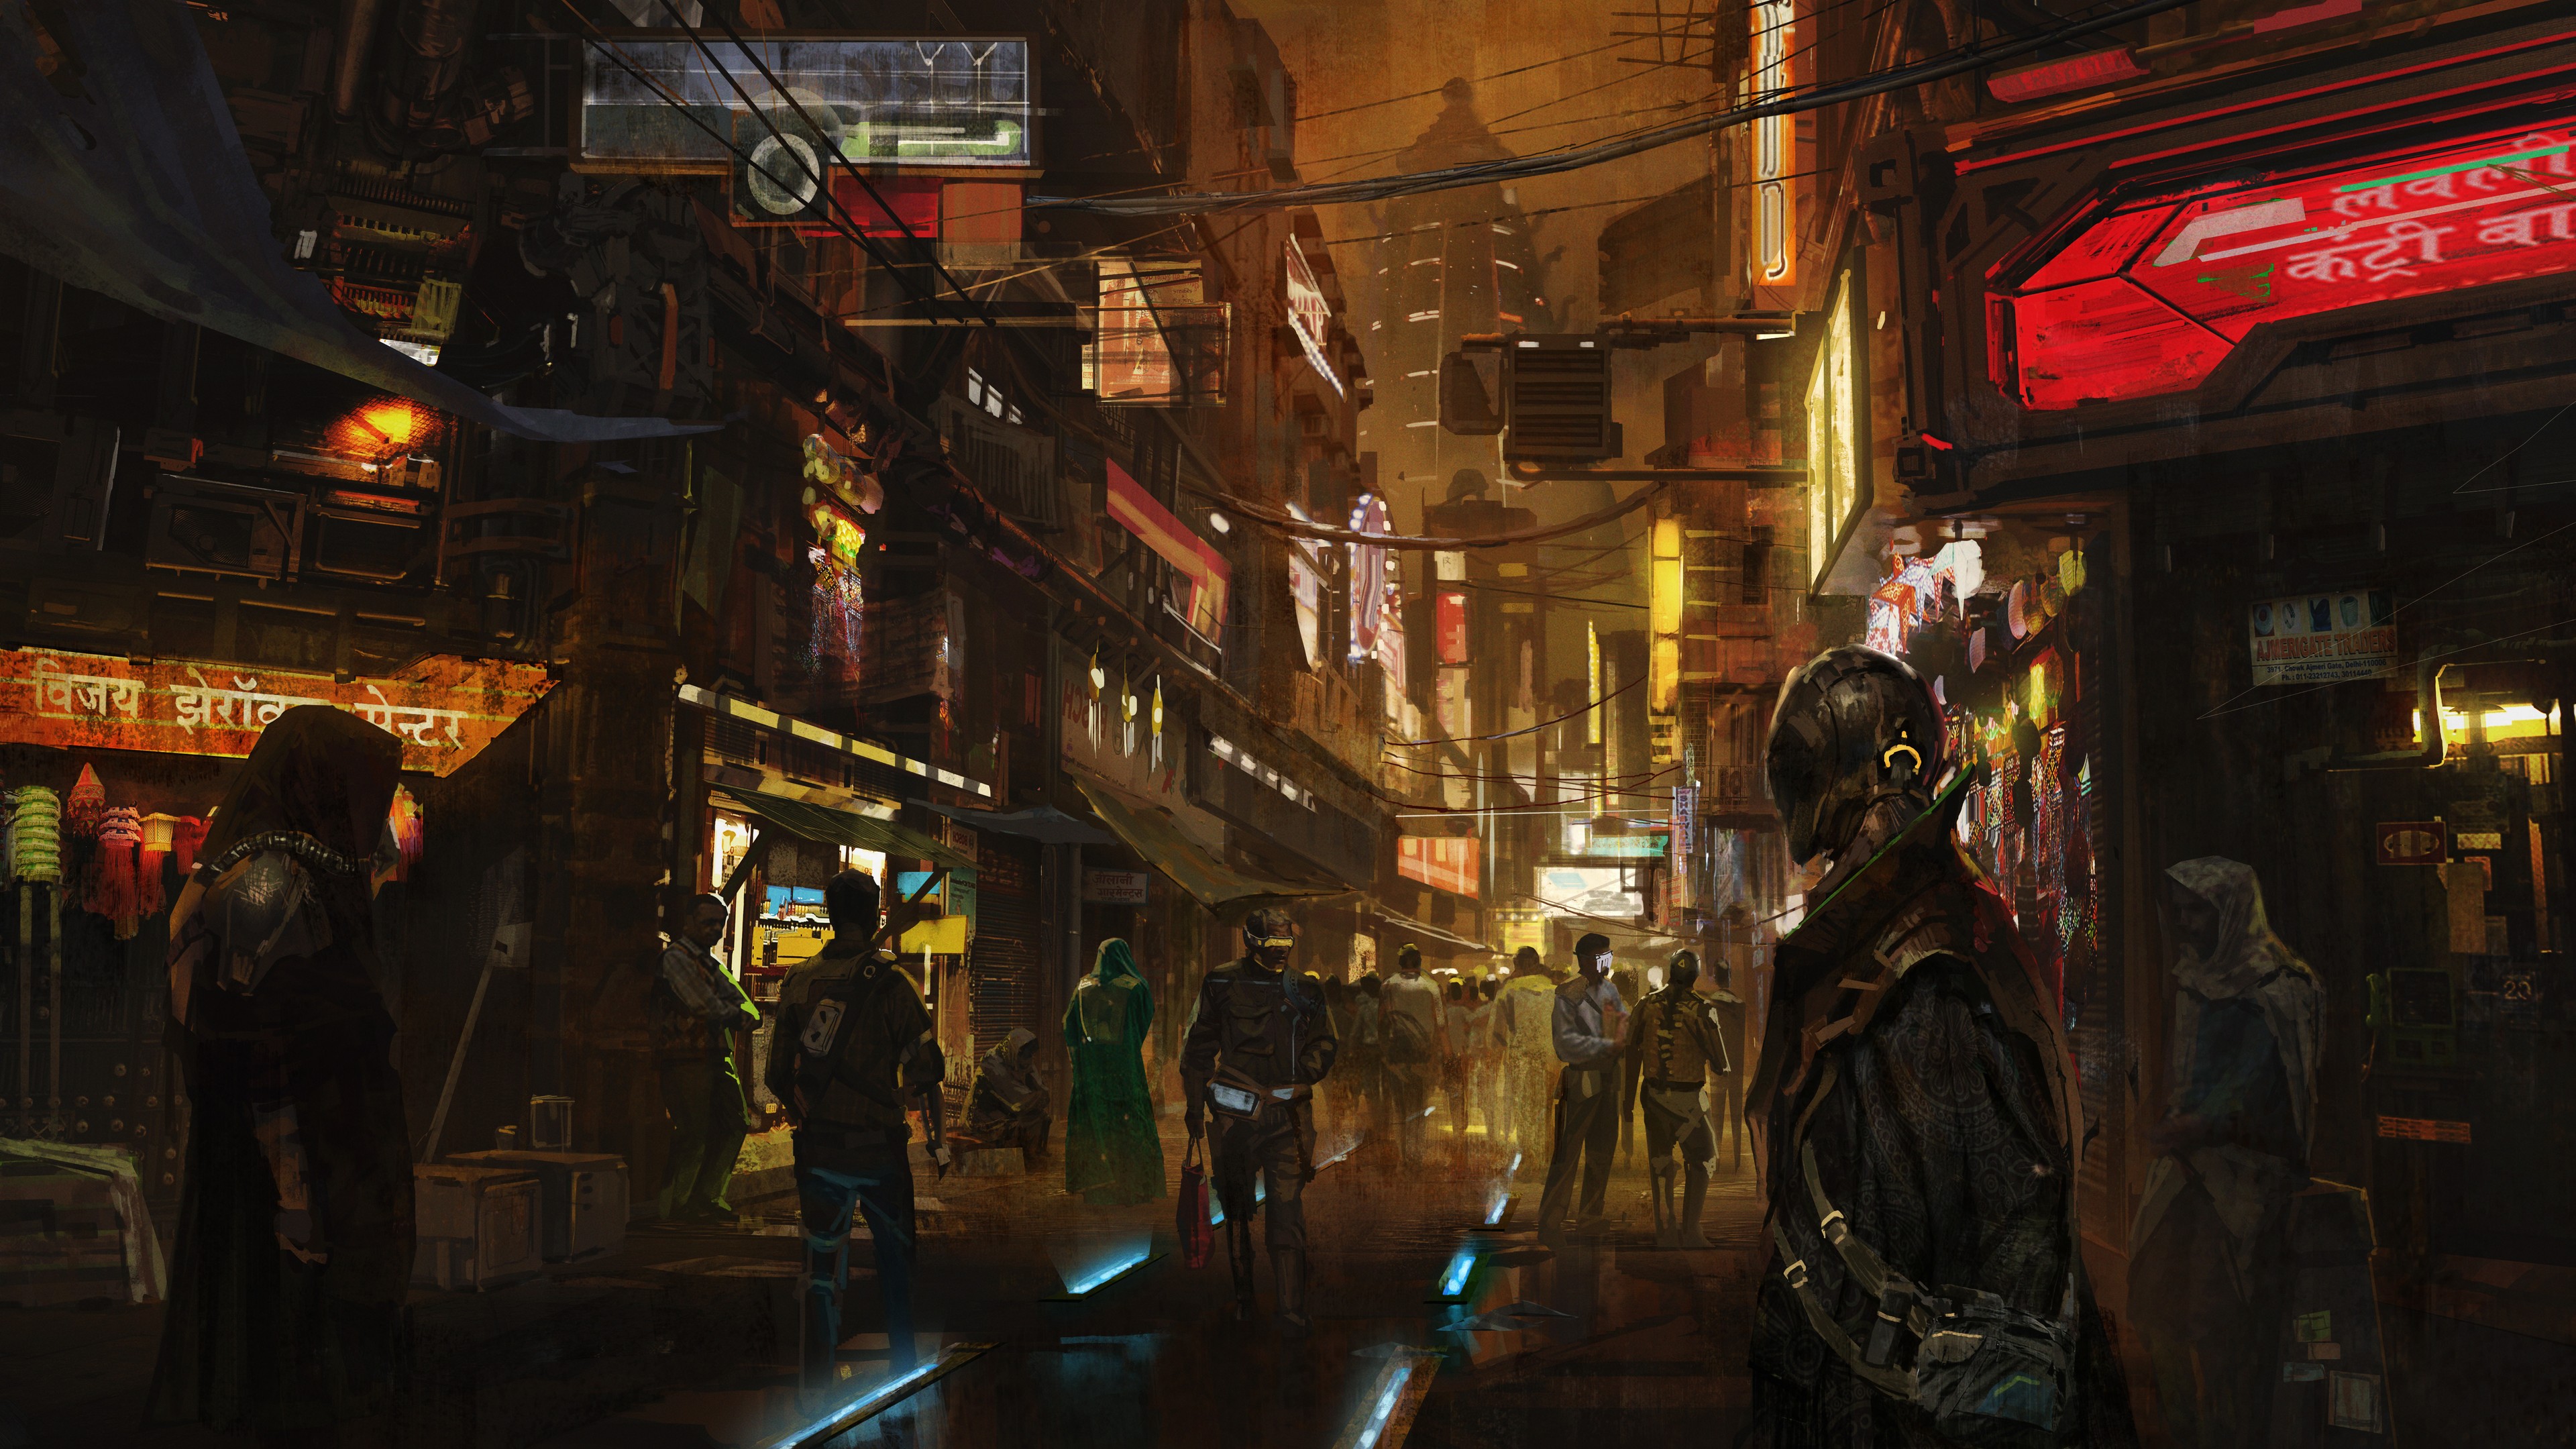 Futuristic Indian Street by Bill Zhang